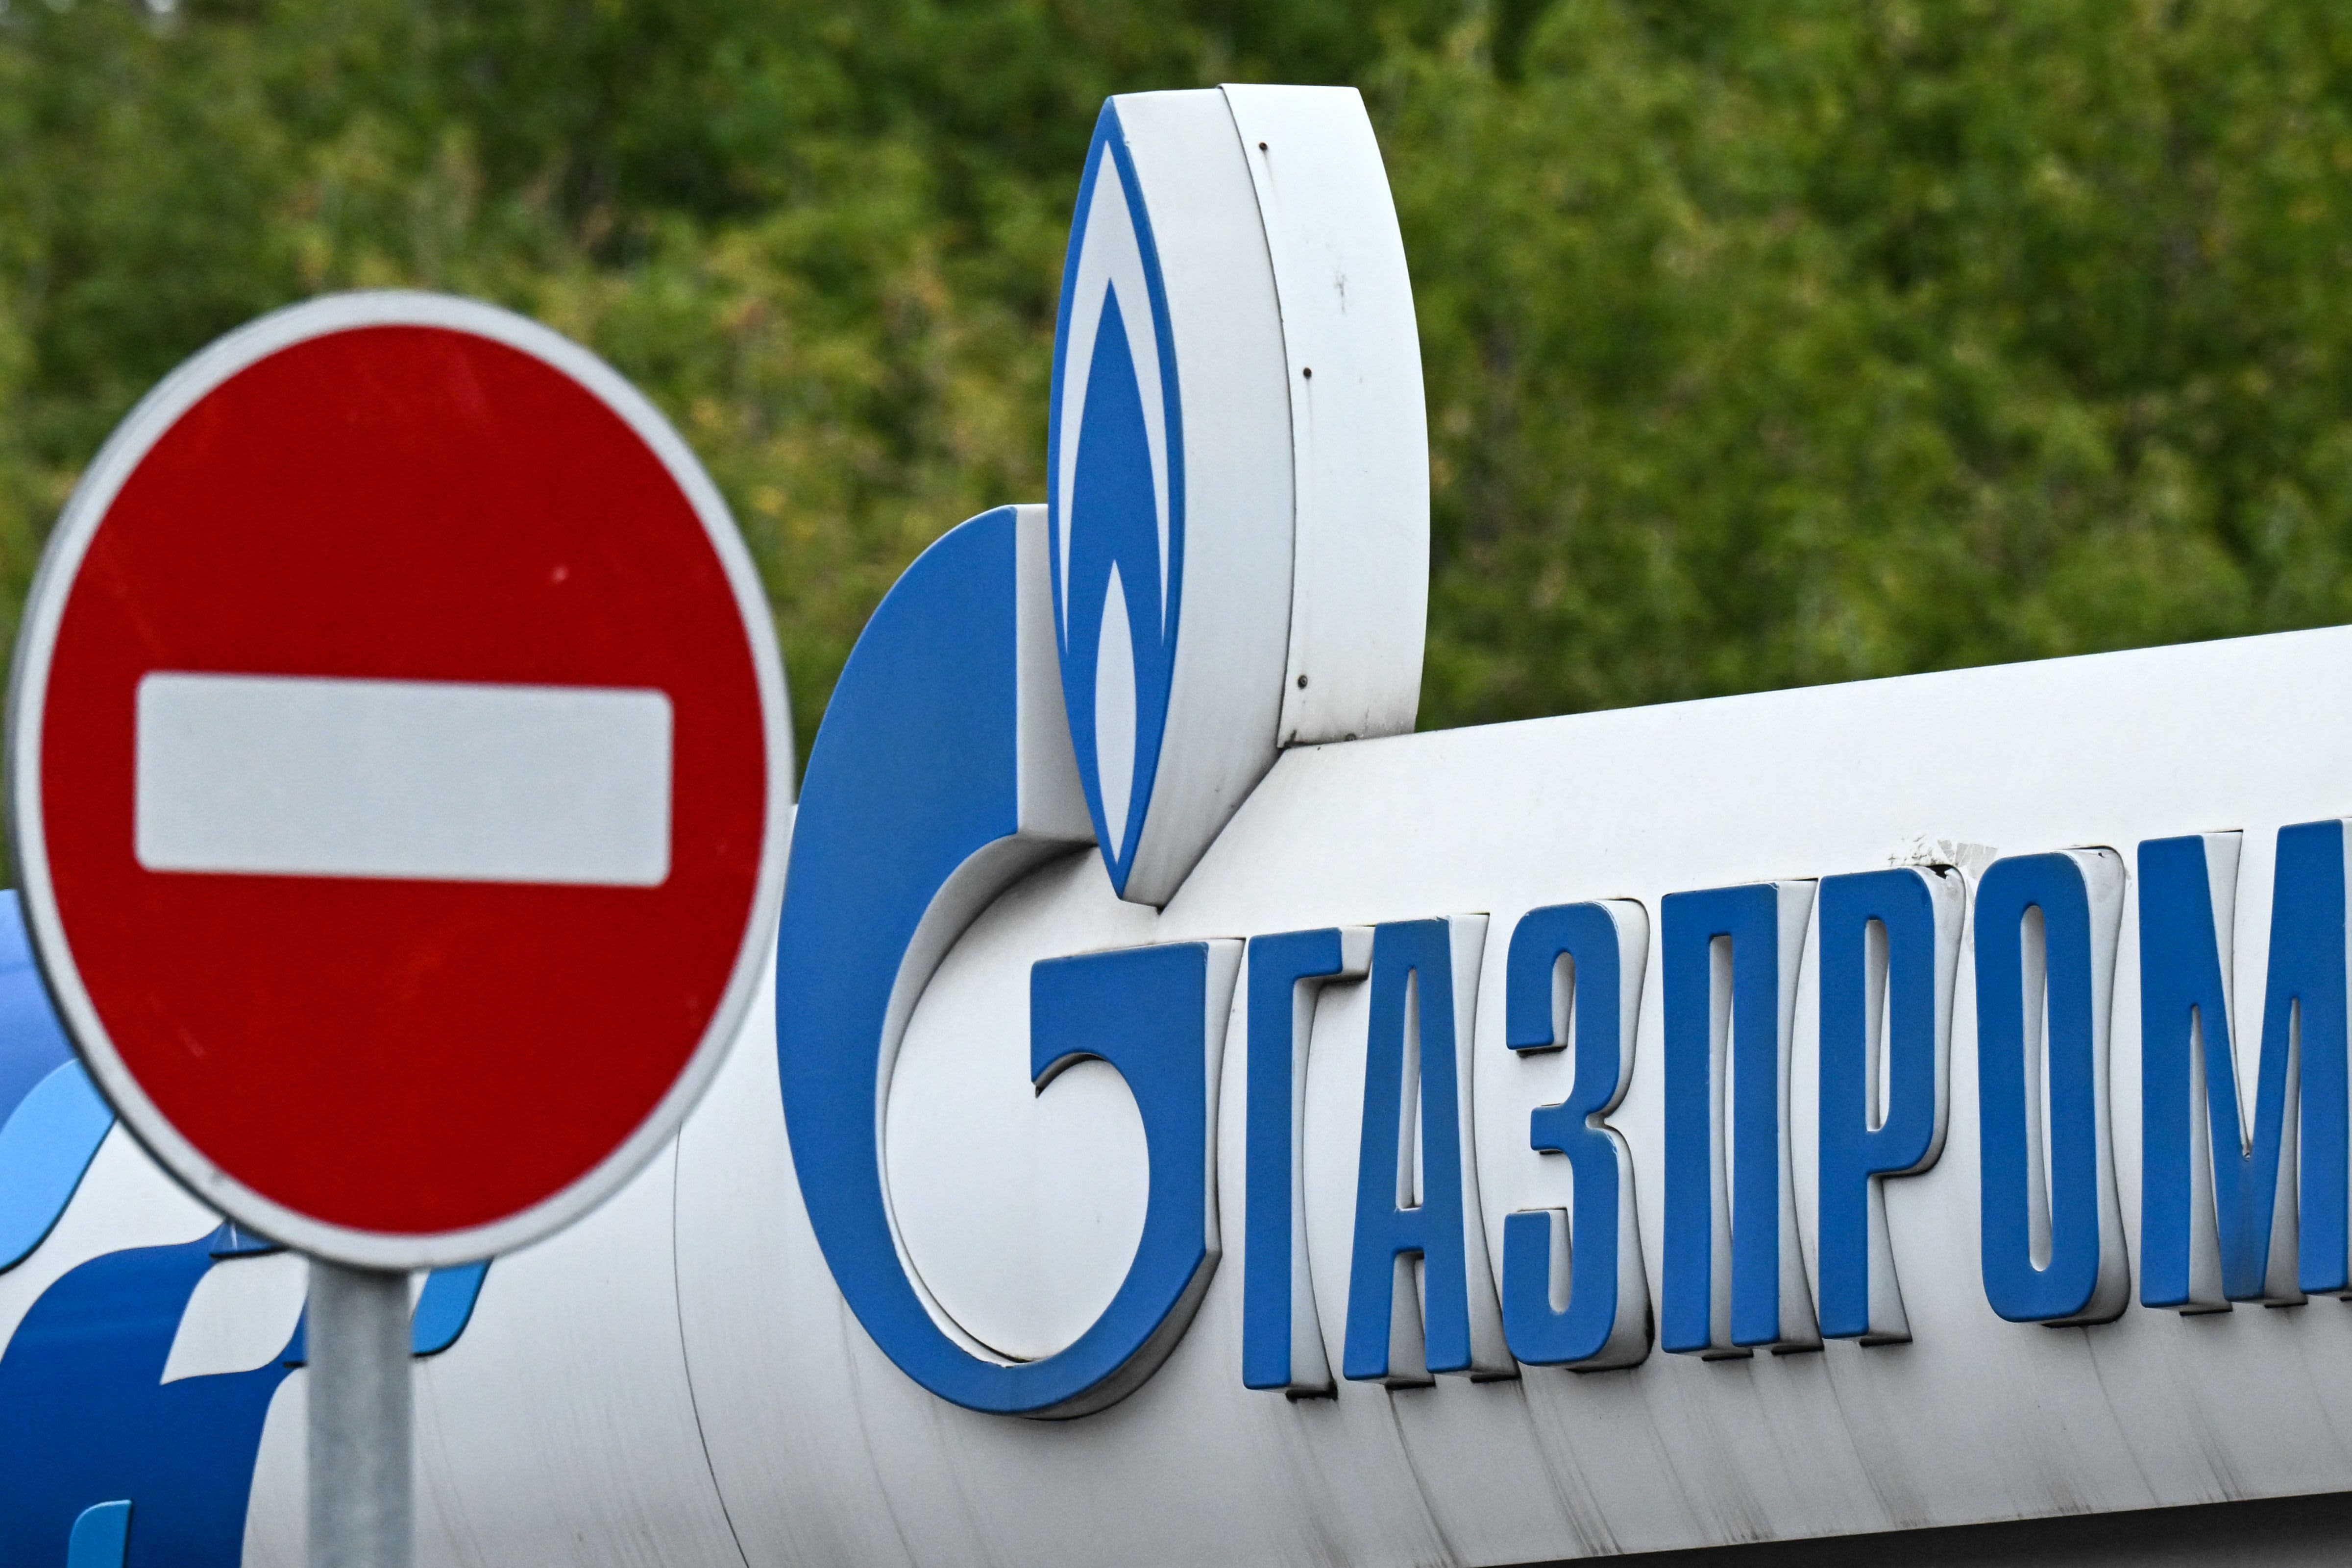 Europe’s gas price cap leaves some nations dismayed